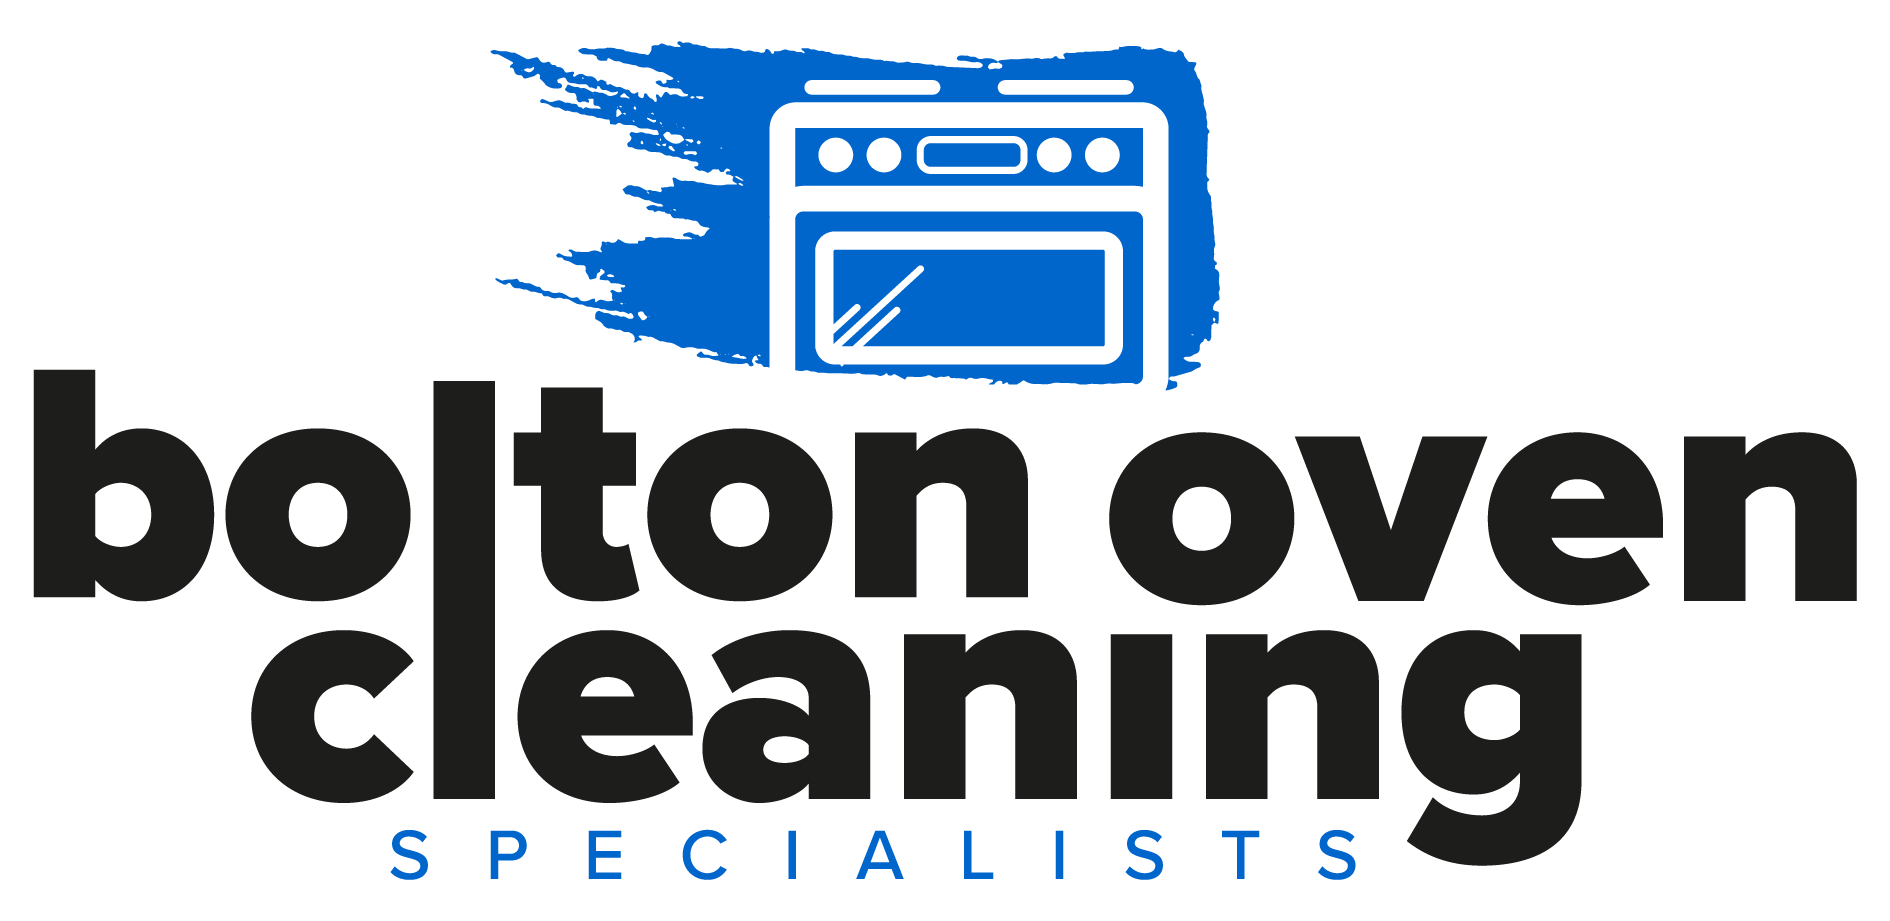 Bolton Oven Cleaning Specialists Logo